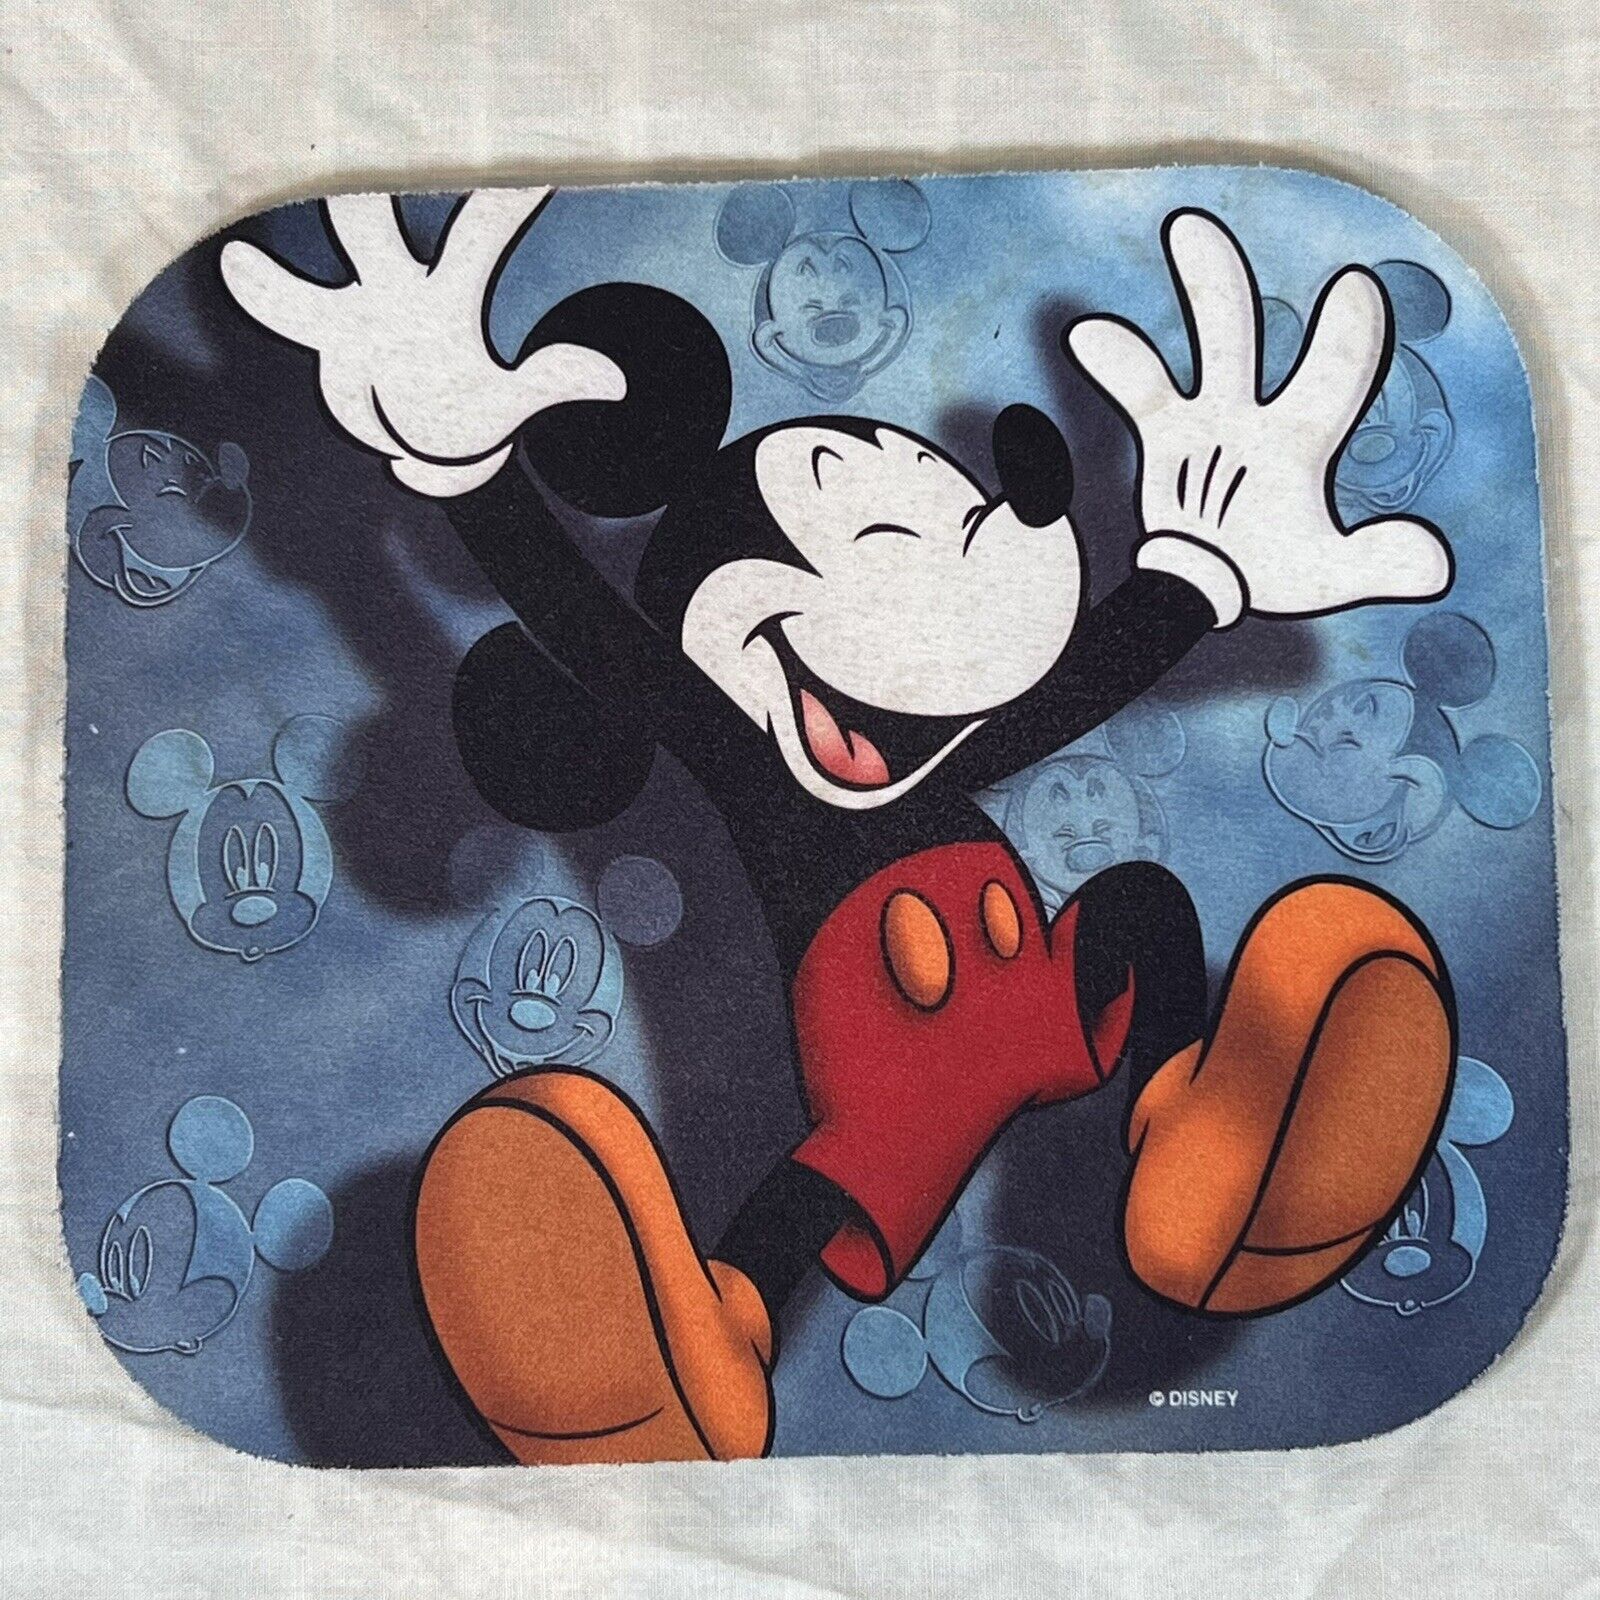 Vintage Disney Mickey Mouse Pad Mousepad Faces Jumping Rubber Unlimited 9x8”